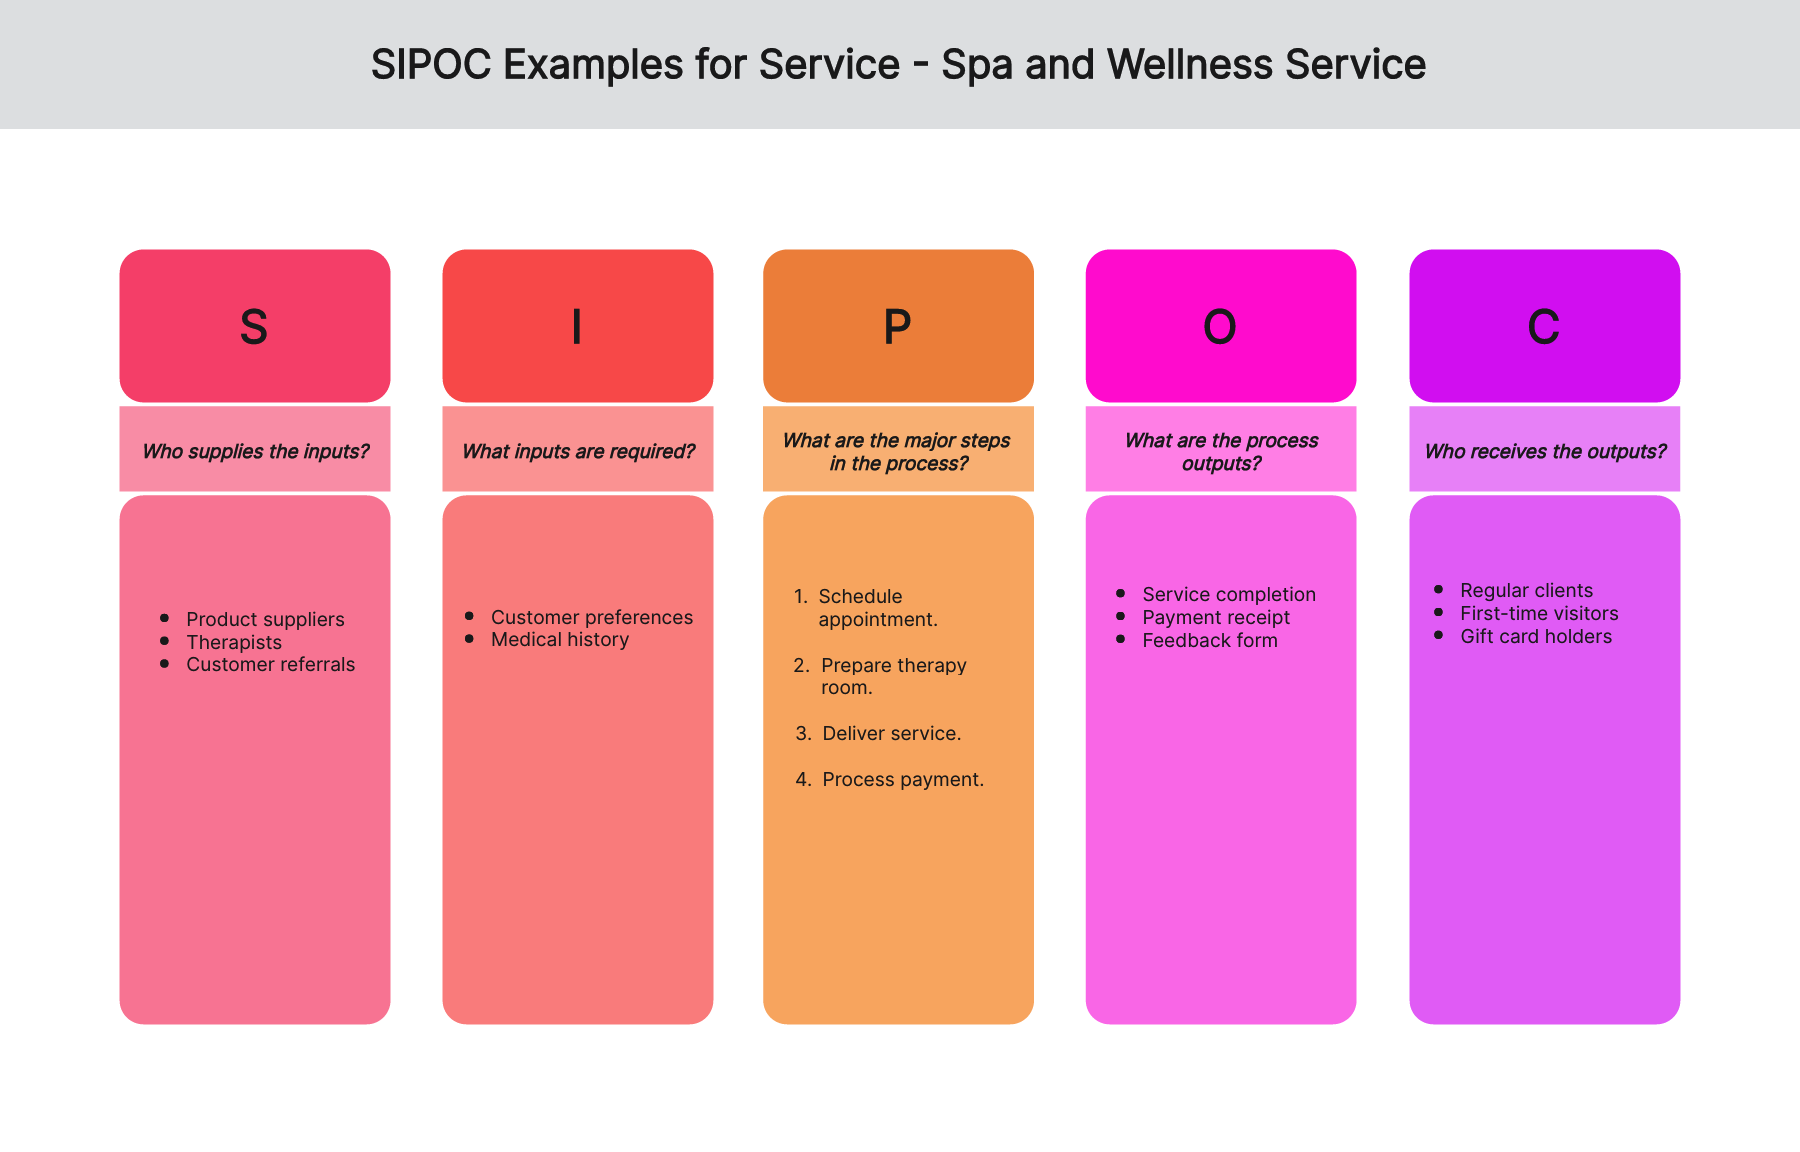 sipoc-examples-service-03